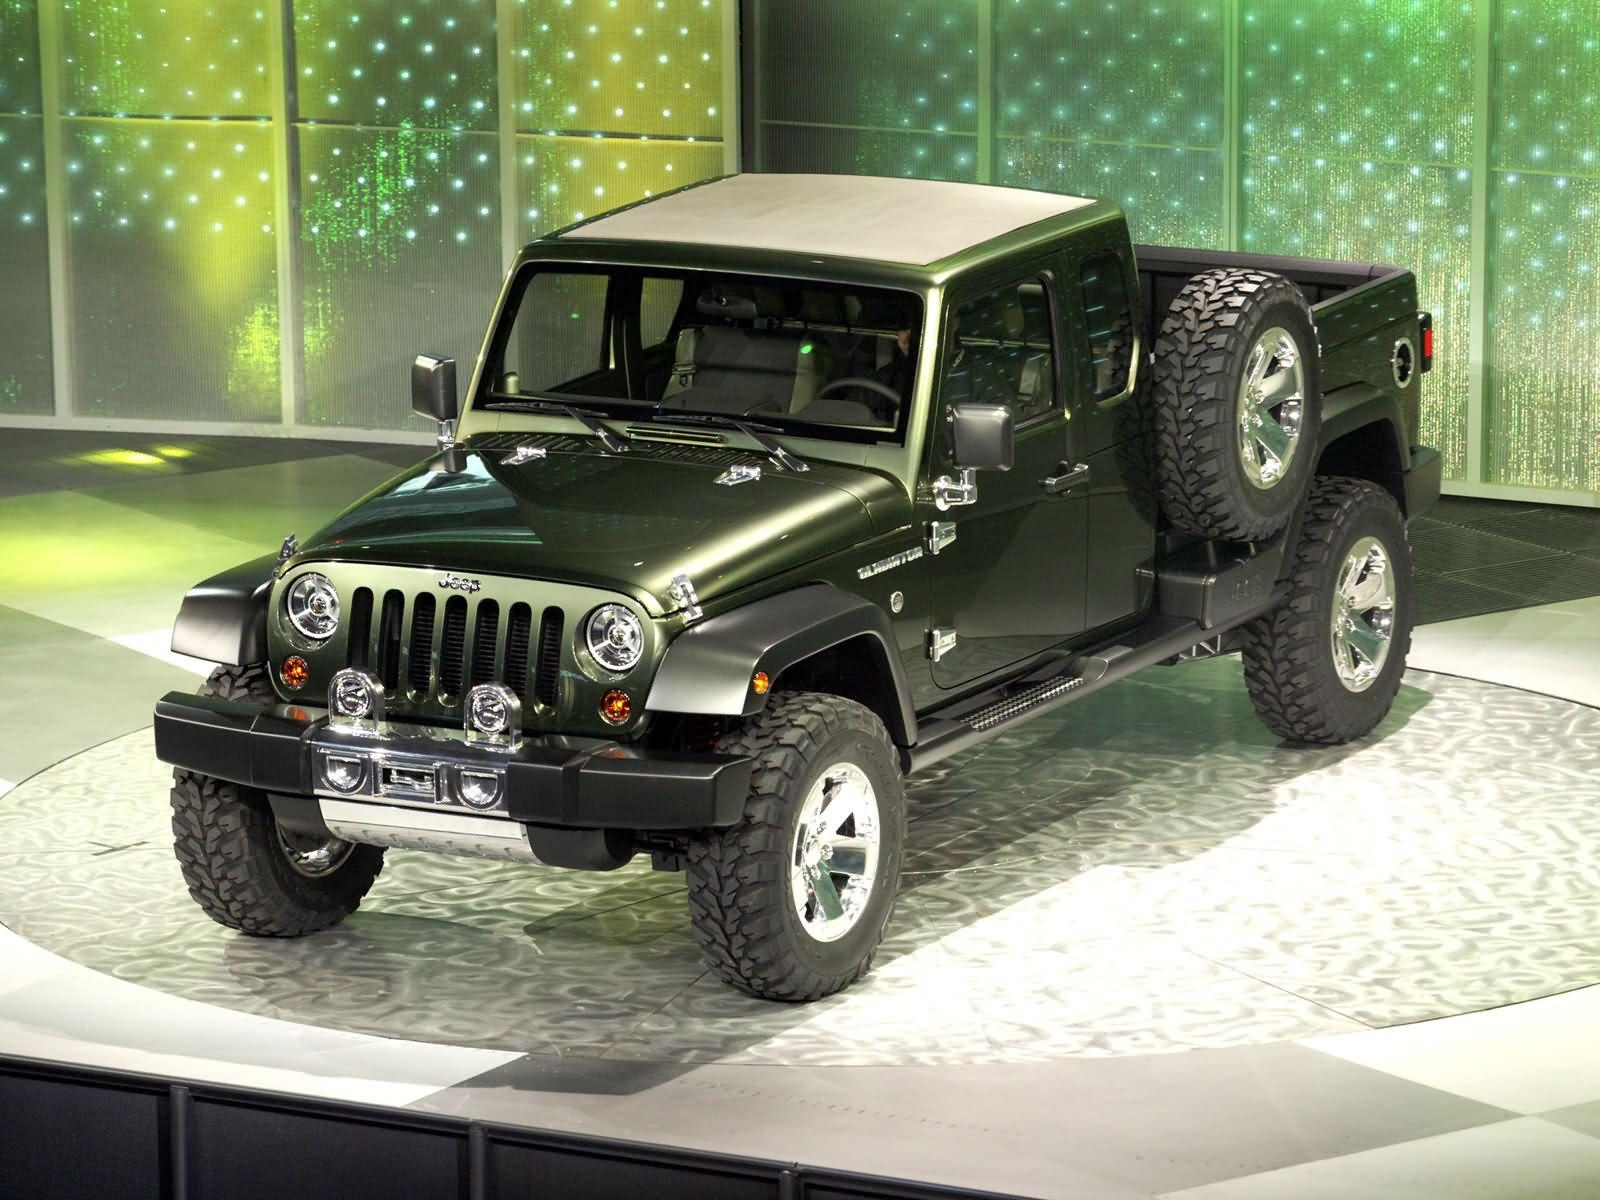 Jeep Gladiator picture. Jeep photo gallery